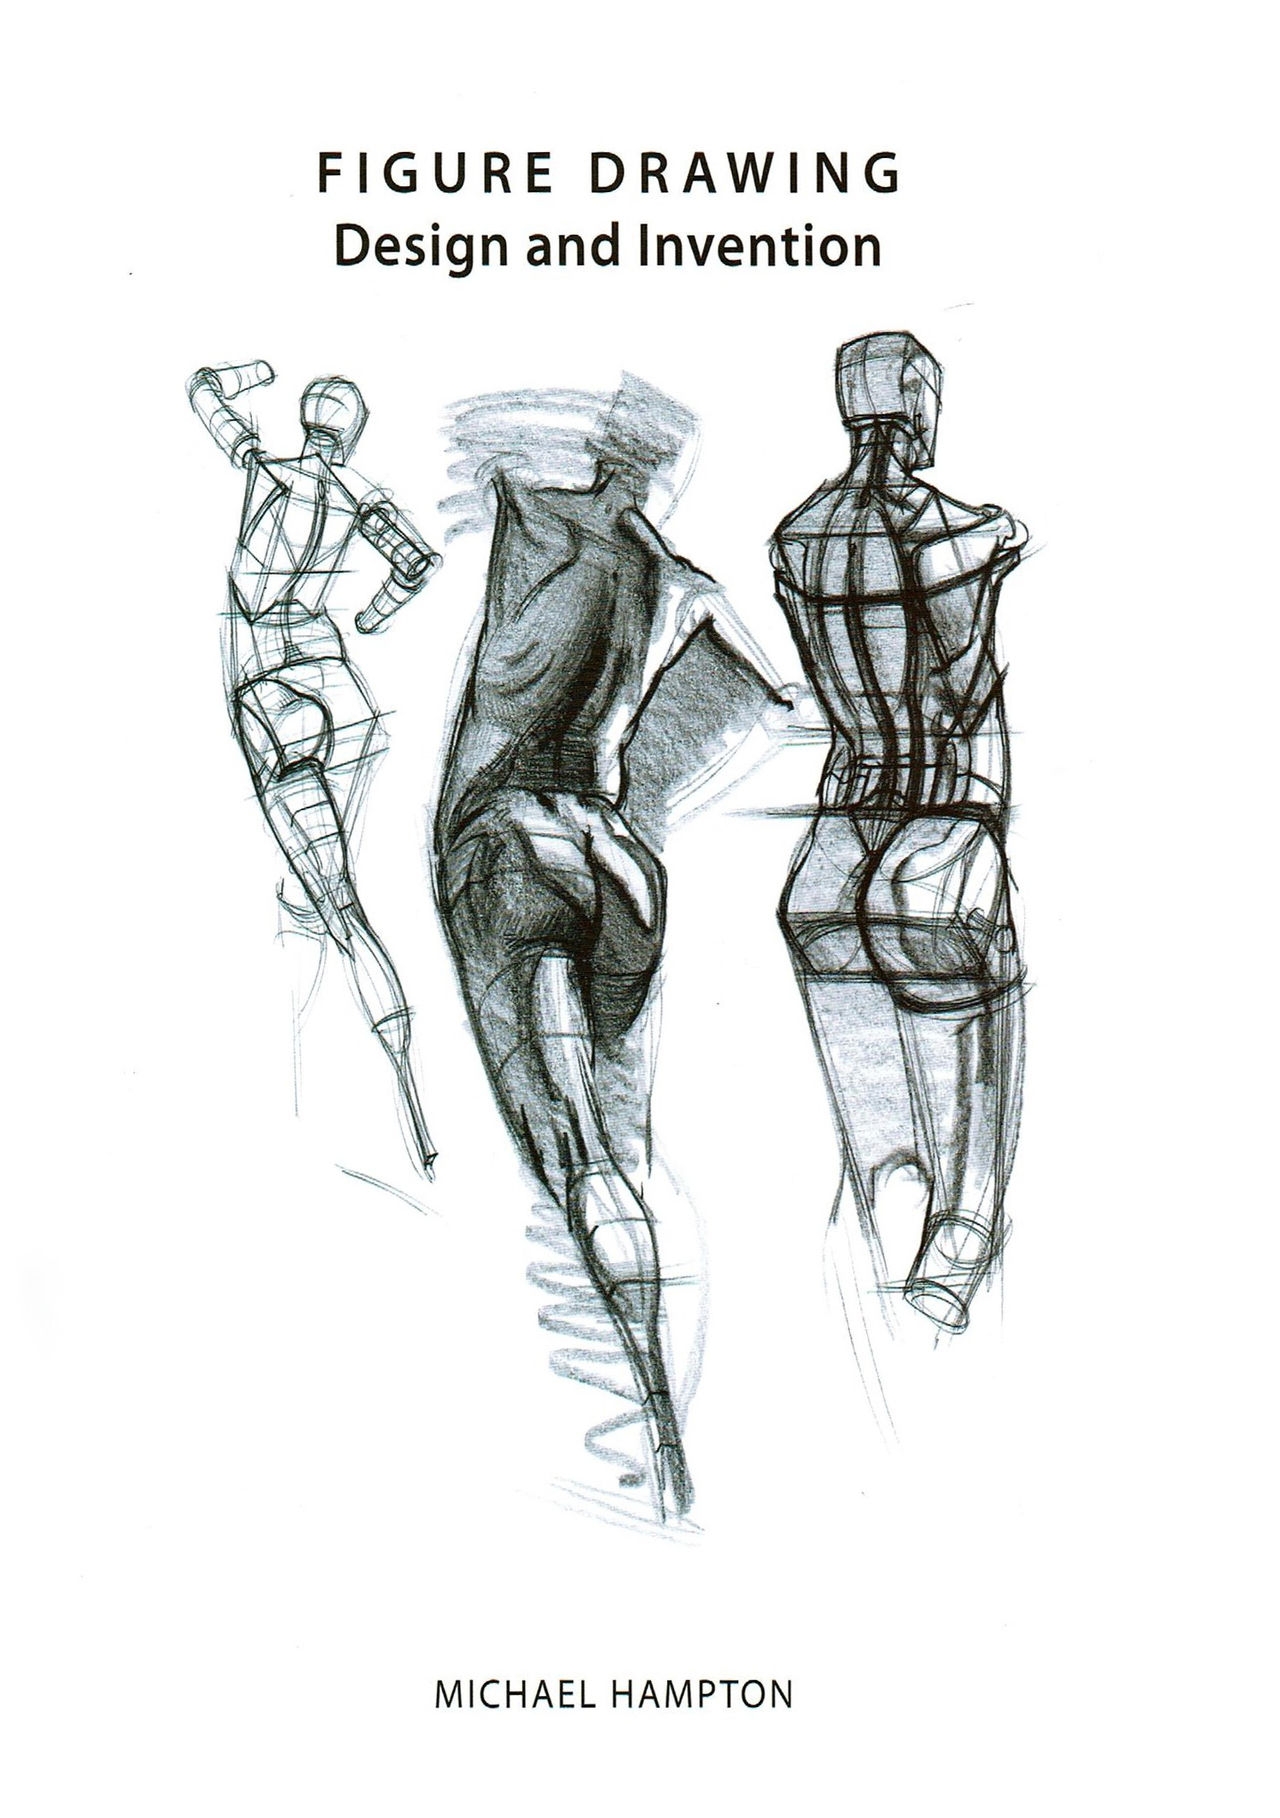 [Micheal Hampton] FIGURE DRAWING, Design and Invention (2013 Edition) 2